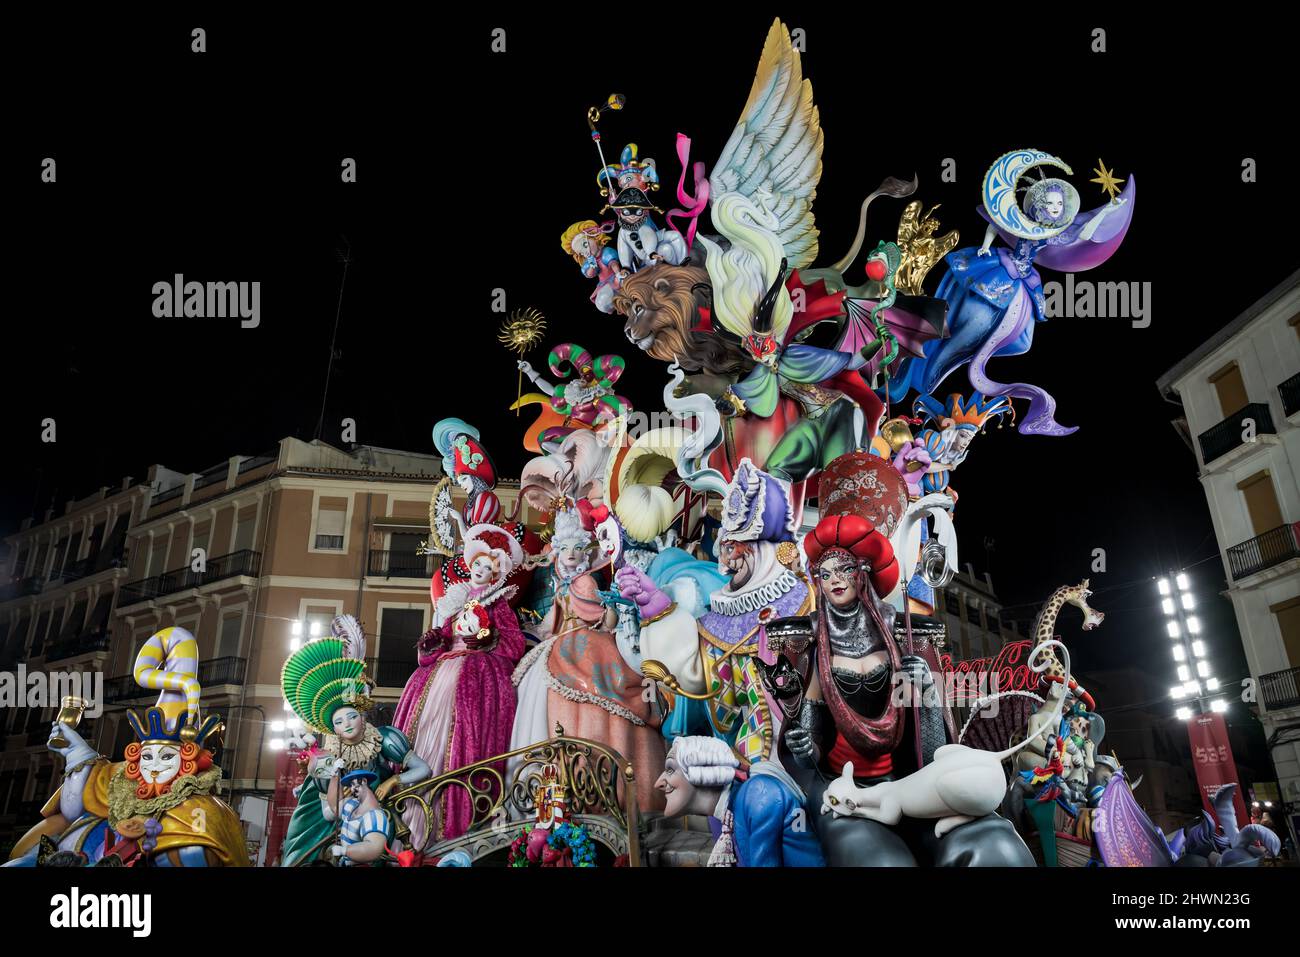 Valencia, Spain - 4 September 2021: Large Fallas display, years winning work with the topic 'Venice fantasy' by the artist Pere Baenas at Convent Jeru Stock Photo